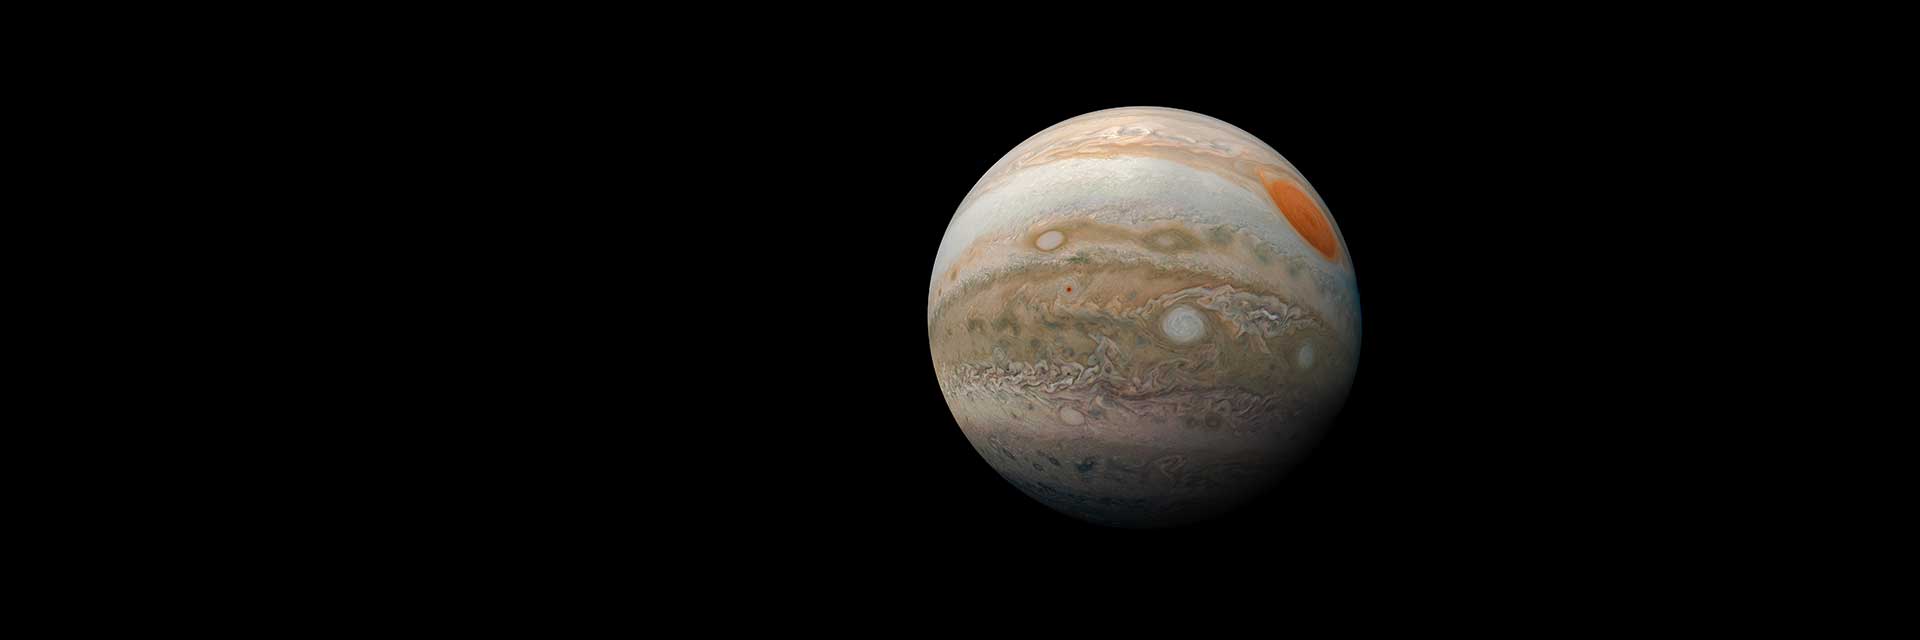 A full-globe view of Jupiter against the darkness of space